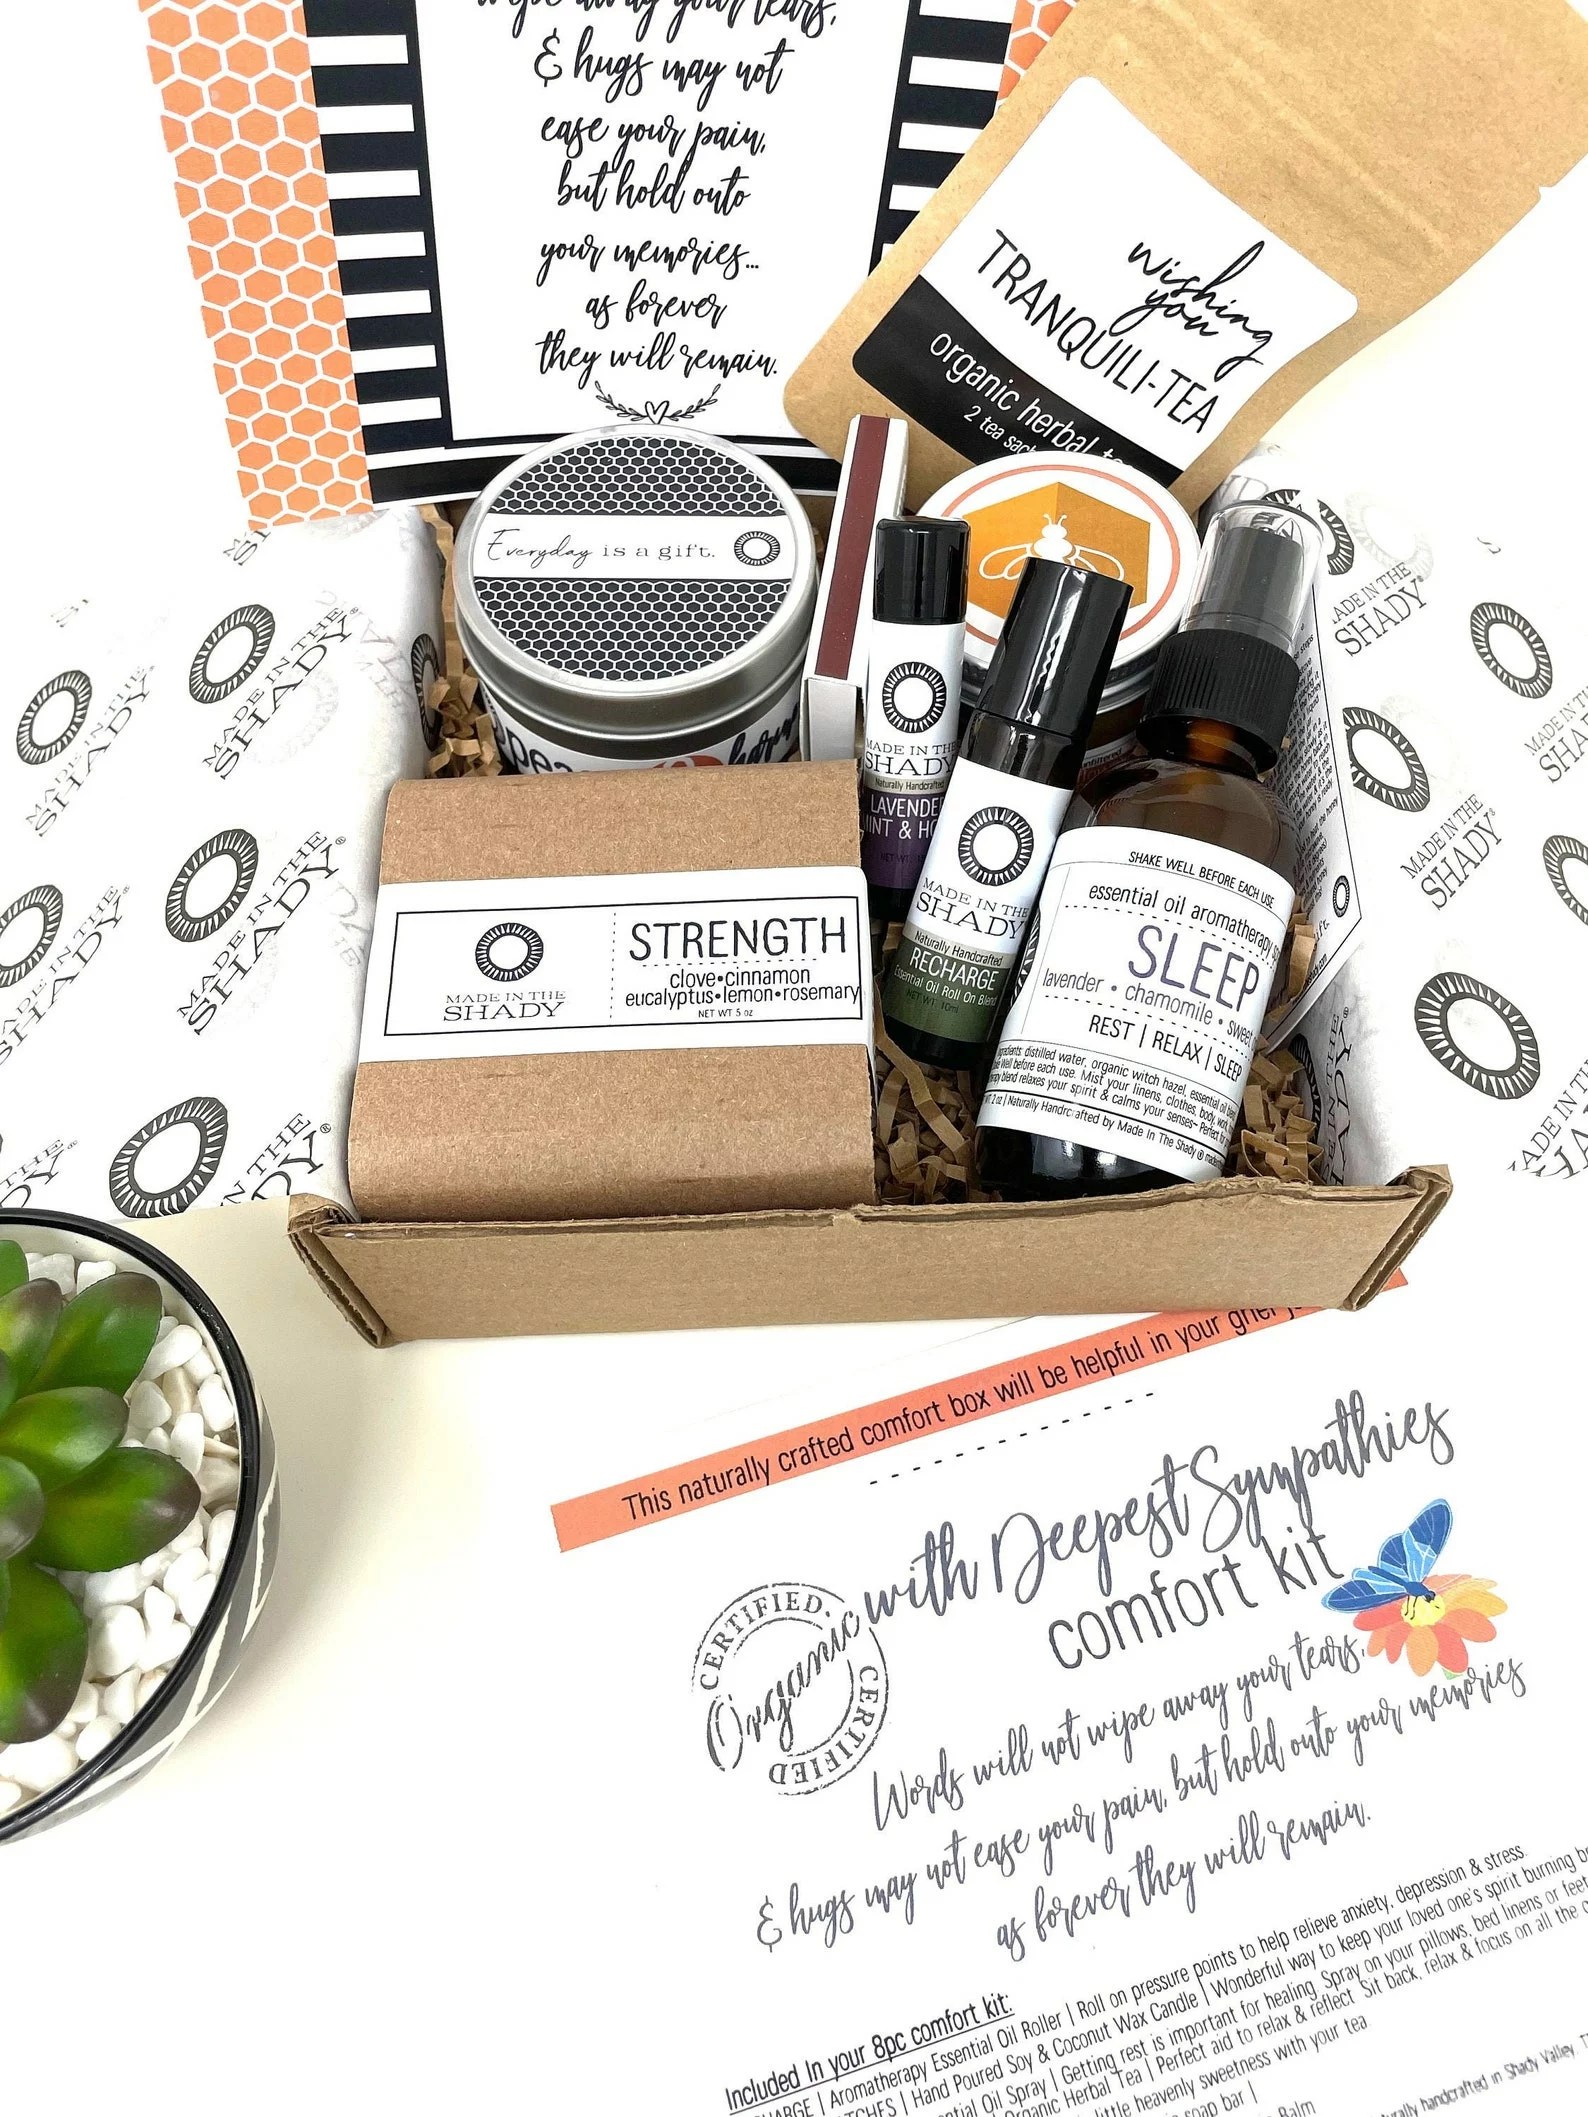 Etsy Self-Care package